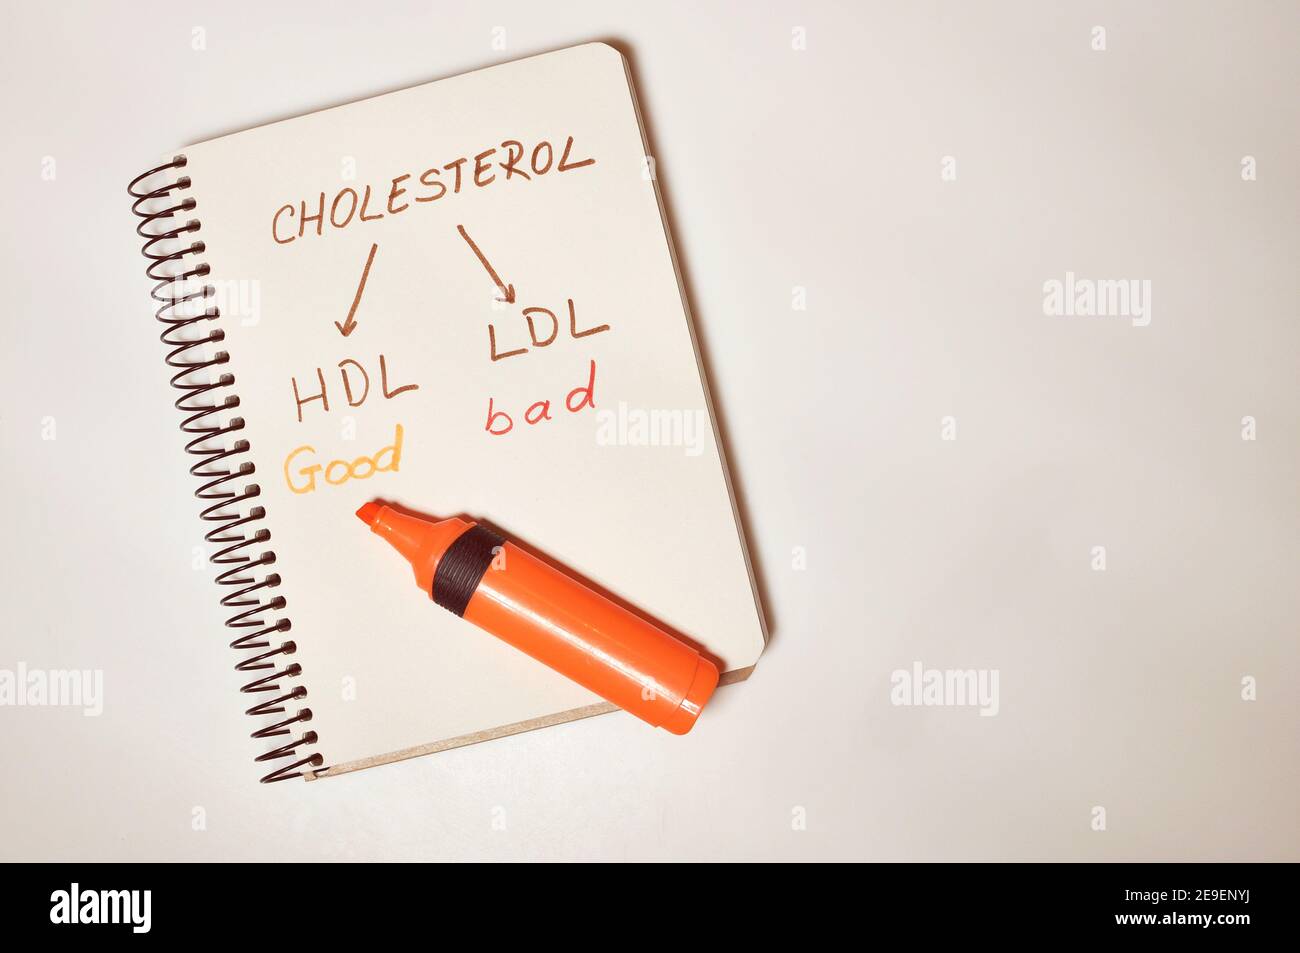 Paper notebook written by had with the concept message Cholesterol (good HDL and bad LDL) on white background with copy text Stock Photo